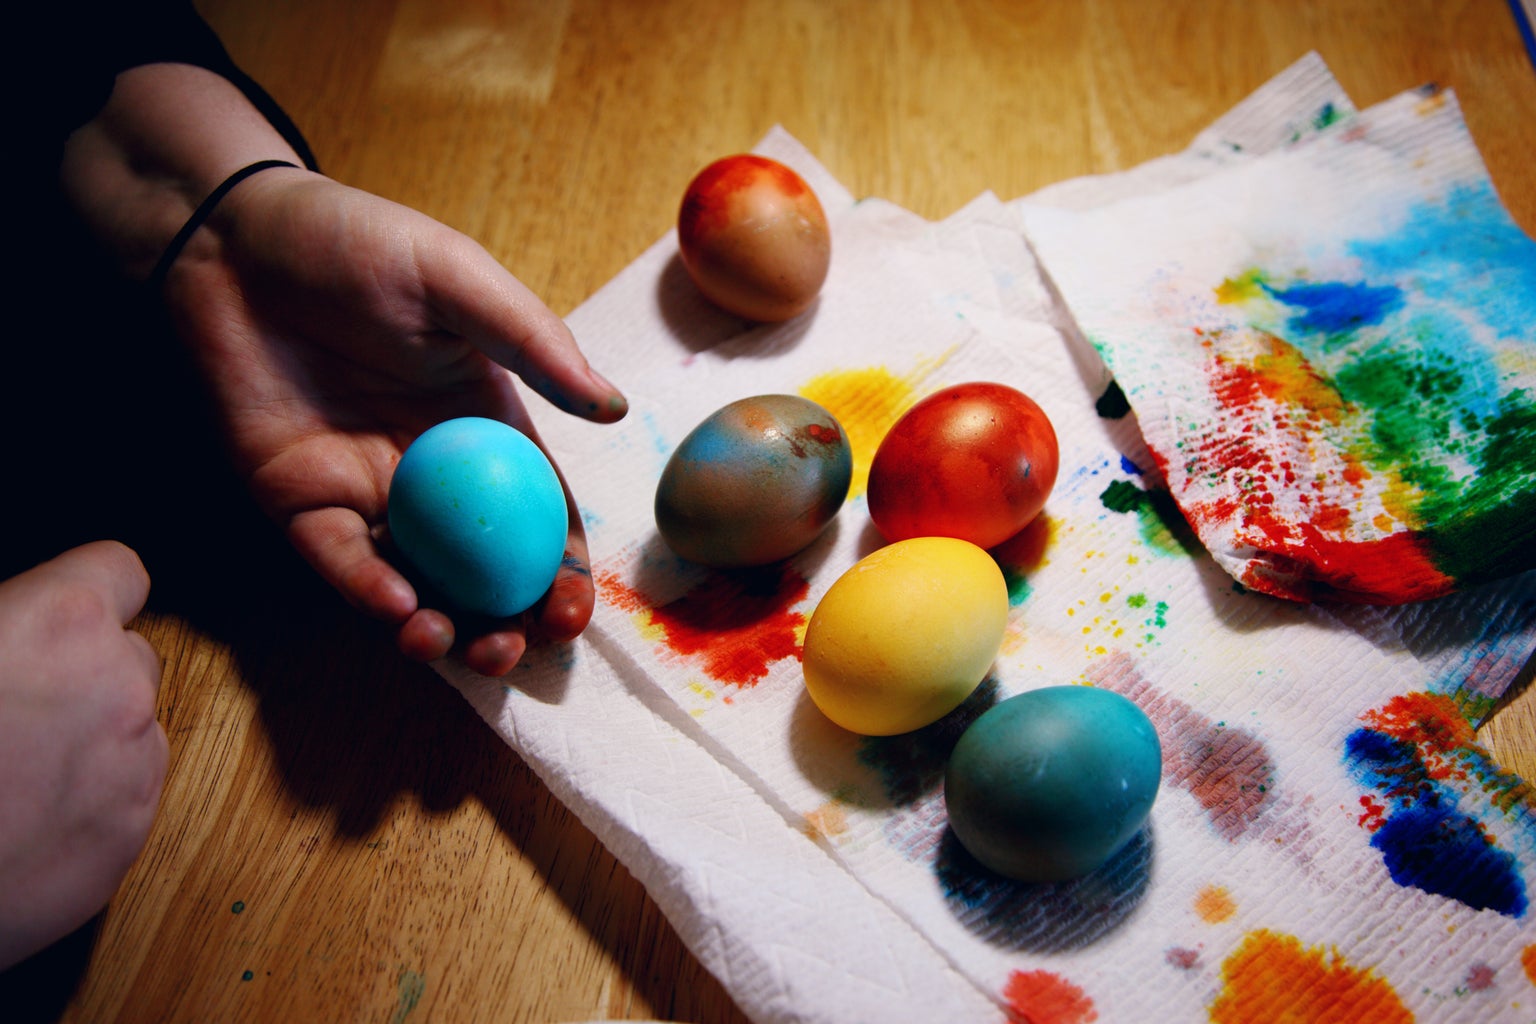 Person holding a blue egg among other colorful eggs on paper towel